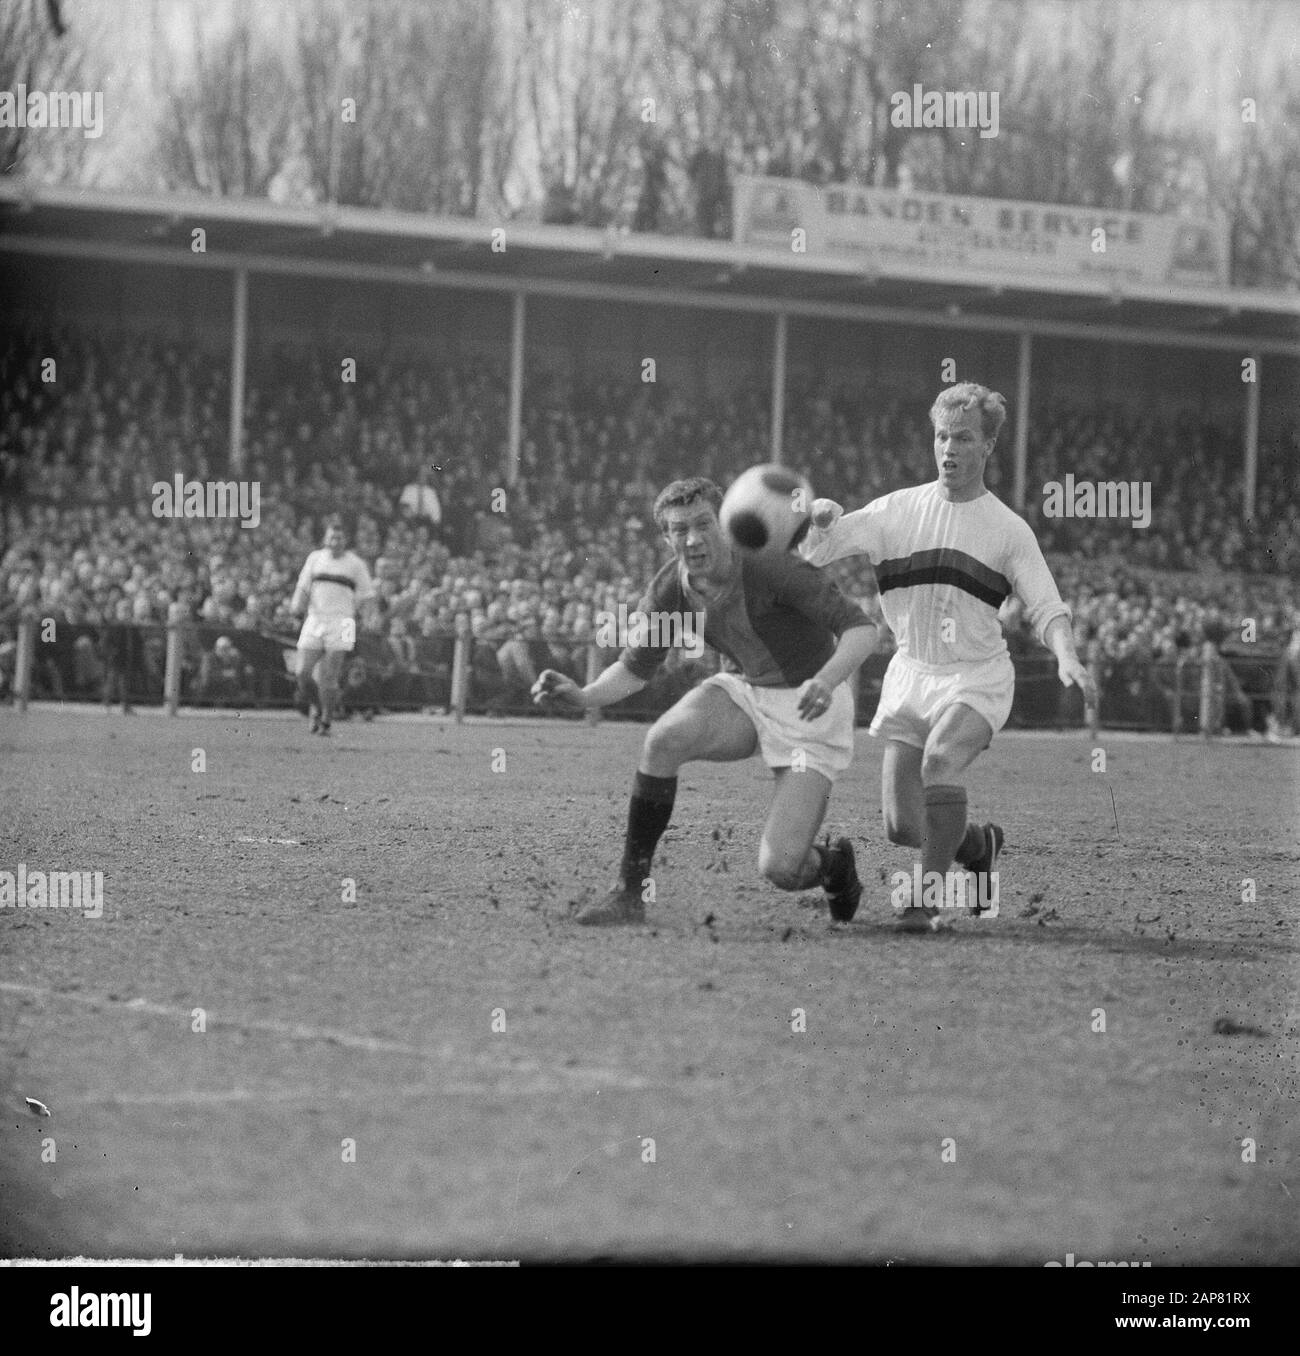 ADO against DWS 1-0, Den Burgh (AFDO) in duel with Lenz (DWS) Date: March 28, 1965 Keywords: sport, football Institution name: ADO Stock Photo